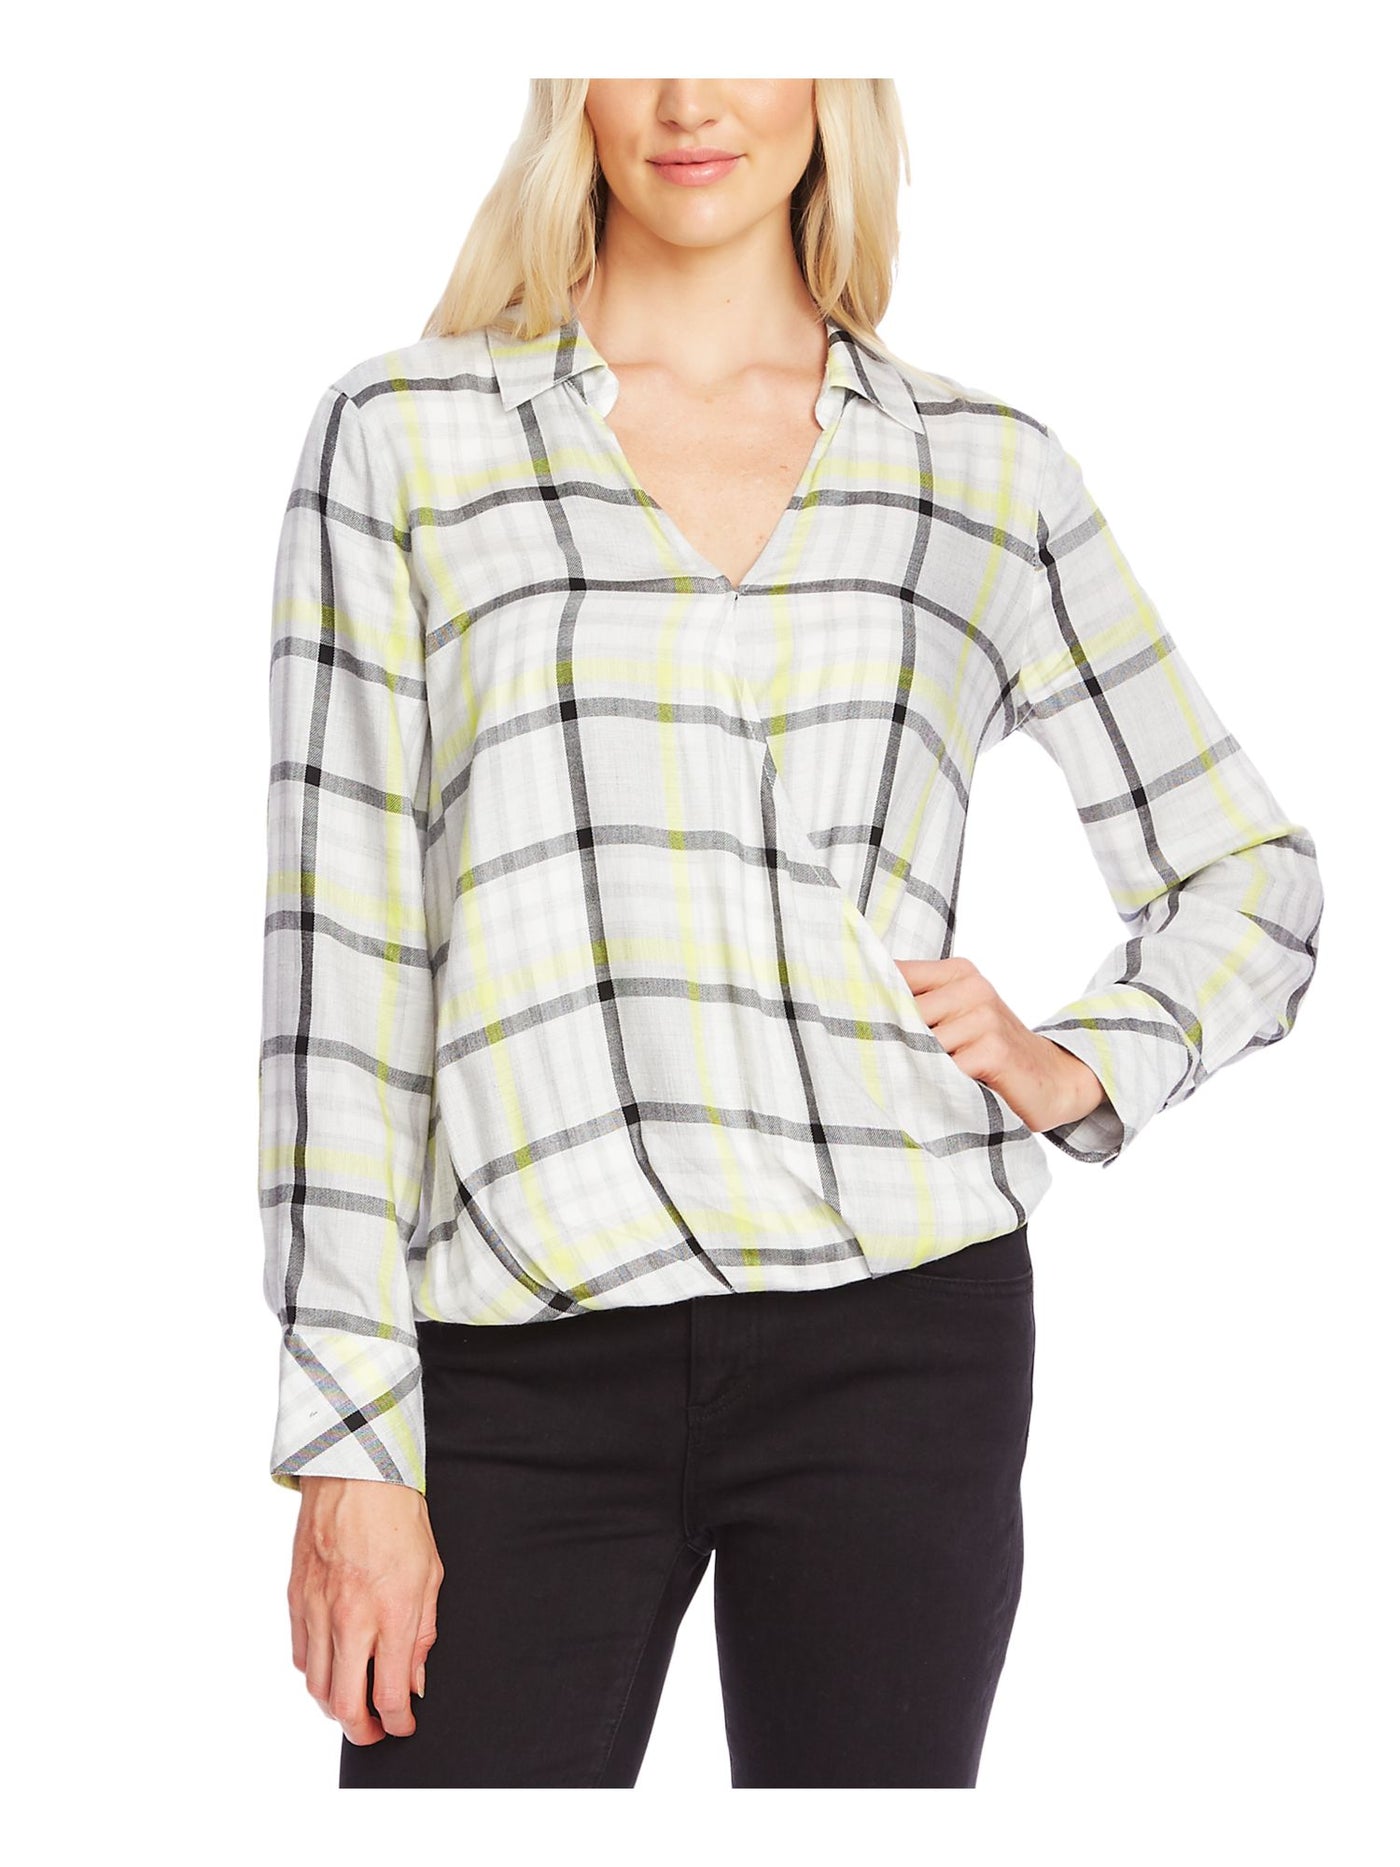 VINCE CAMUTO Womens Gray Plaid Long Sleeve V Neck Faux Wrap Top XL